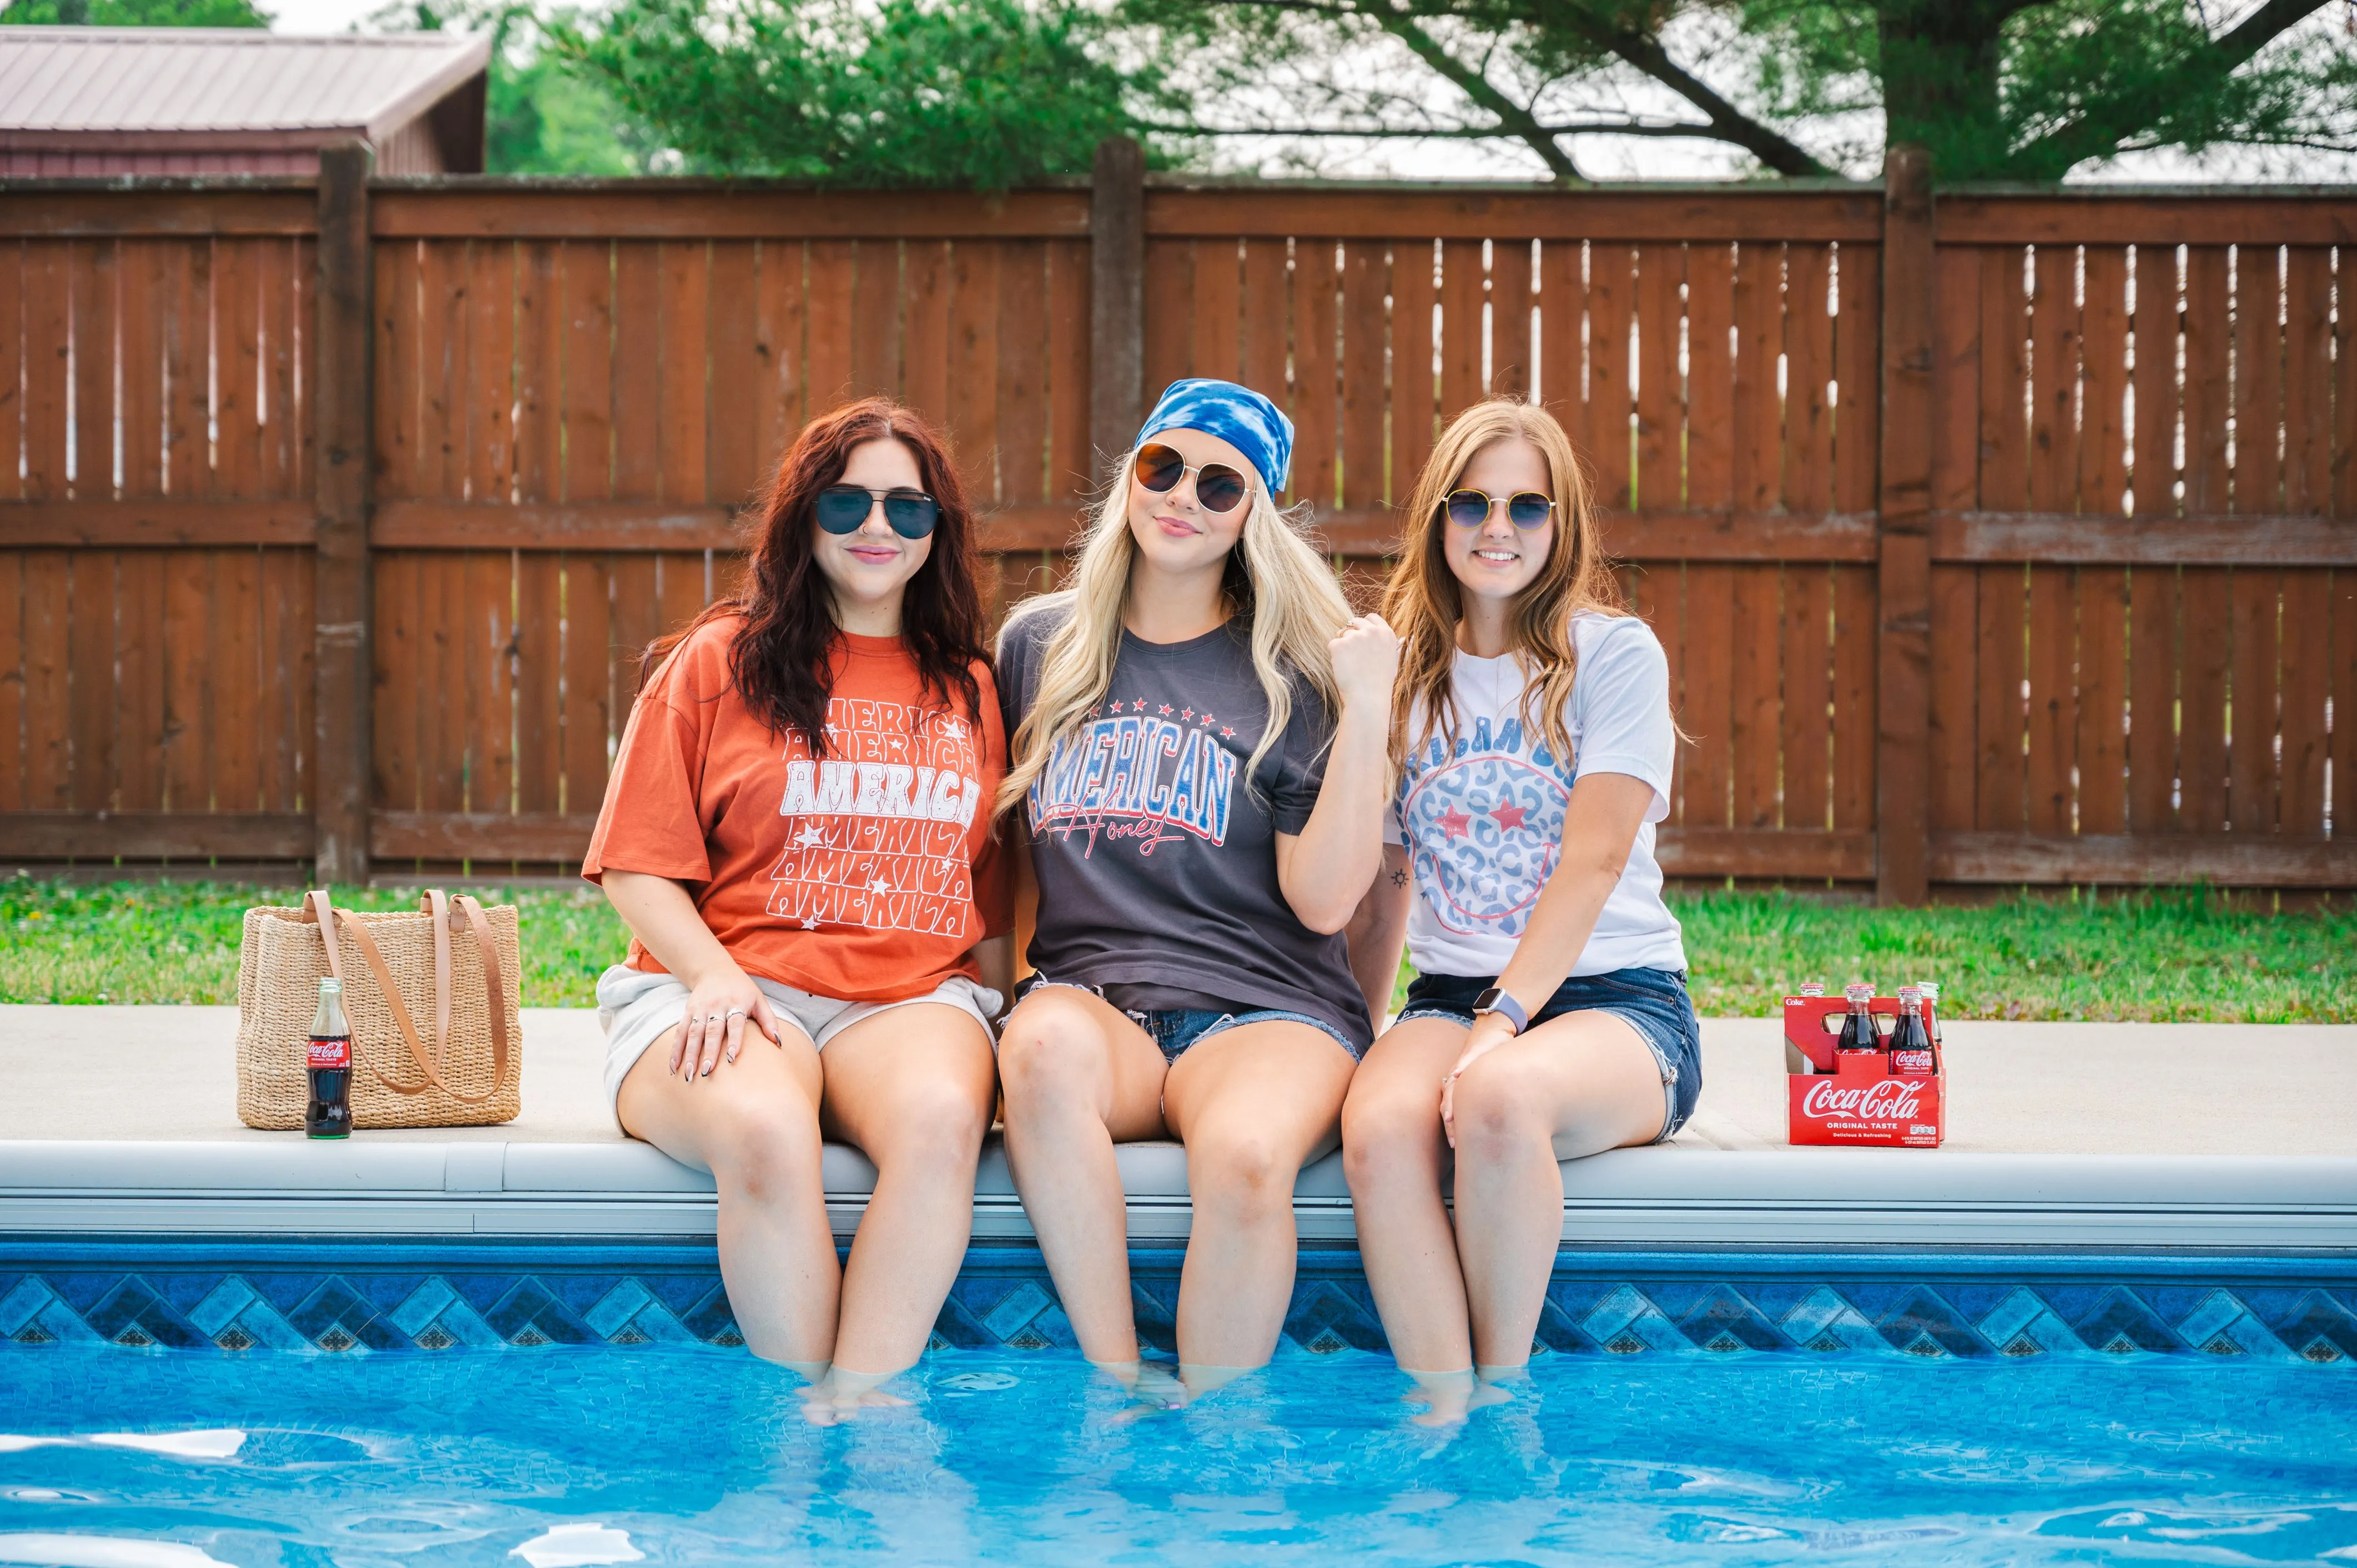 Three women sitting by a pool with their feet dipped in the water, smiling, wearing sunglasses, and patriotic-themed T-shirts. A woven bag and a six-pack of Coca-Cola are placed on the poolside. Wooden fence and greenery are visible in the background.